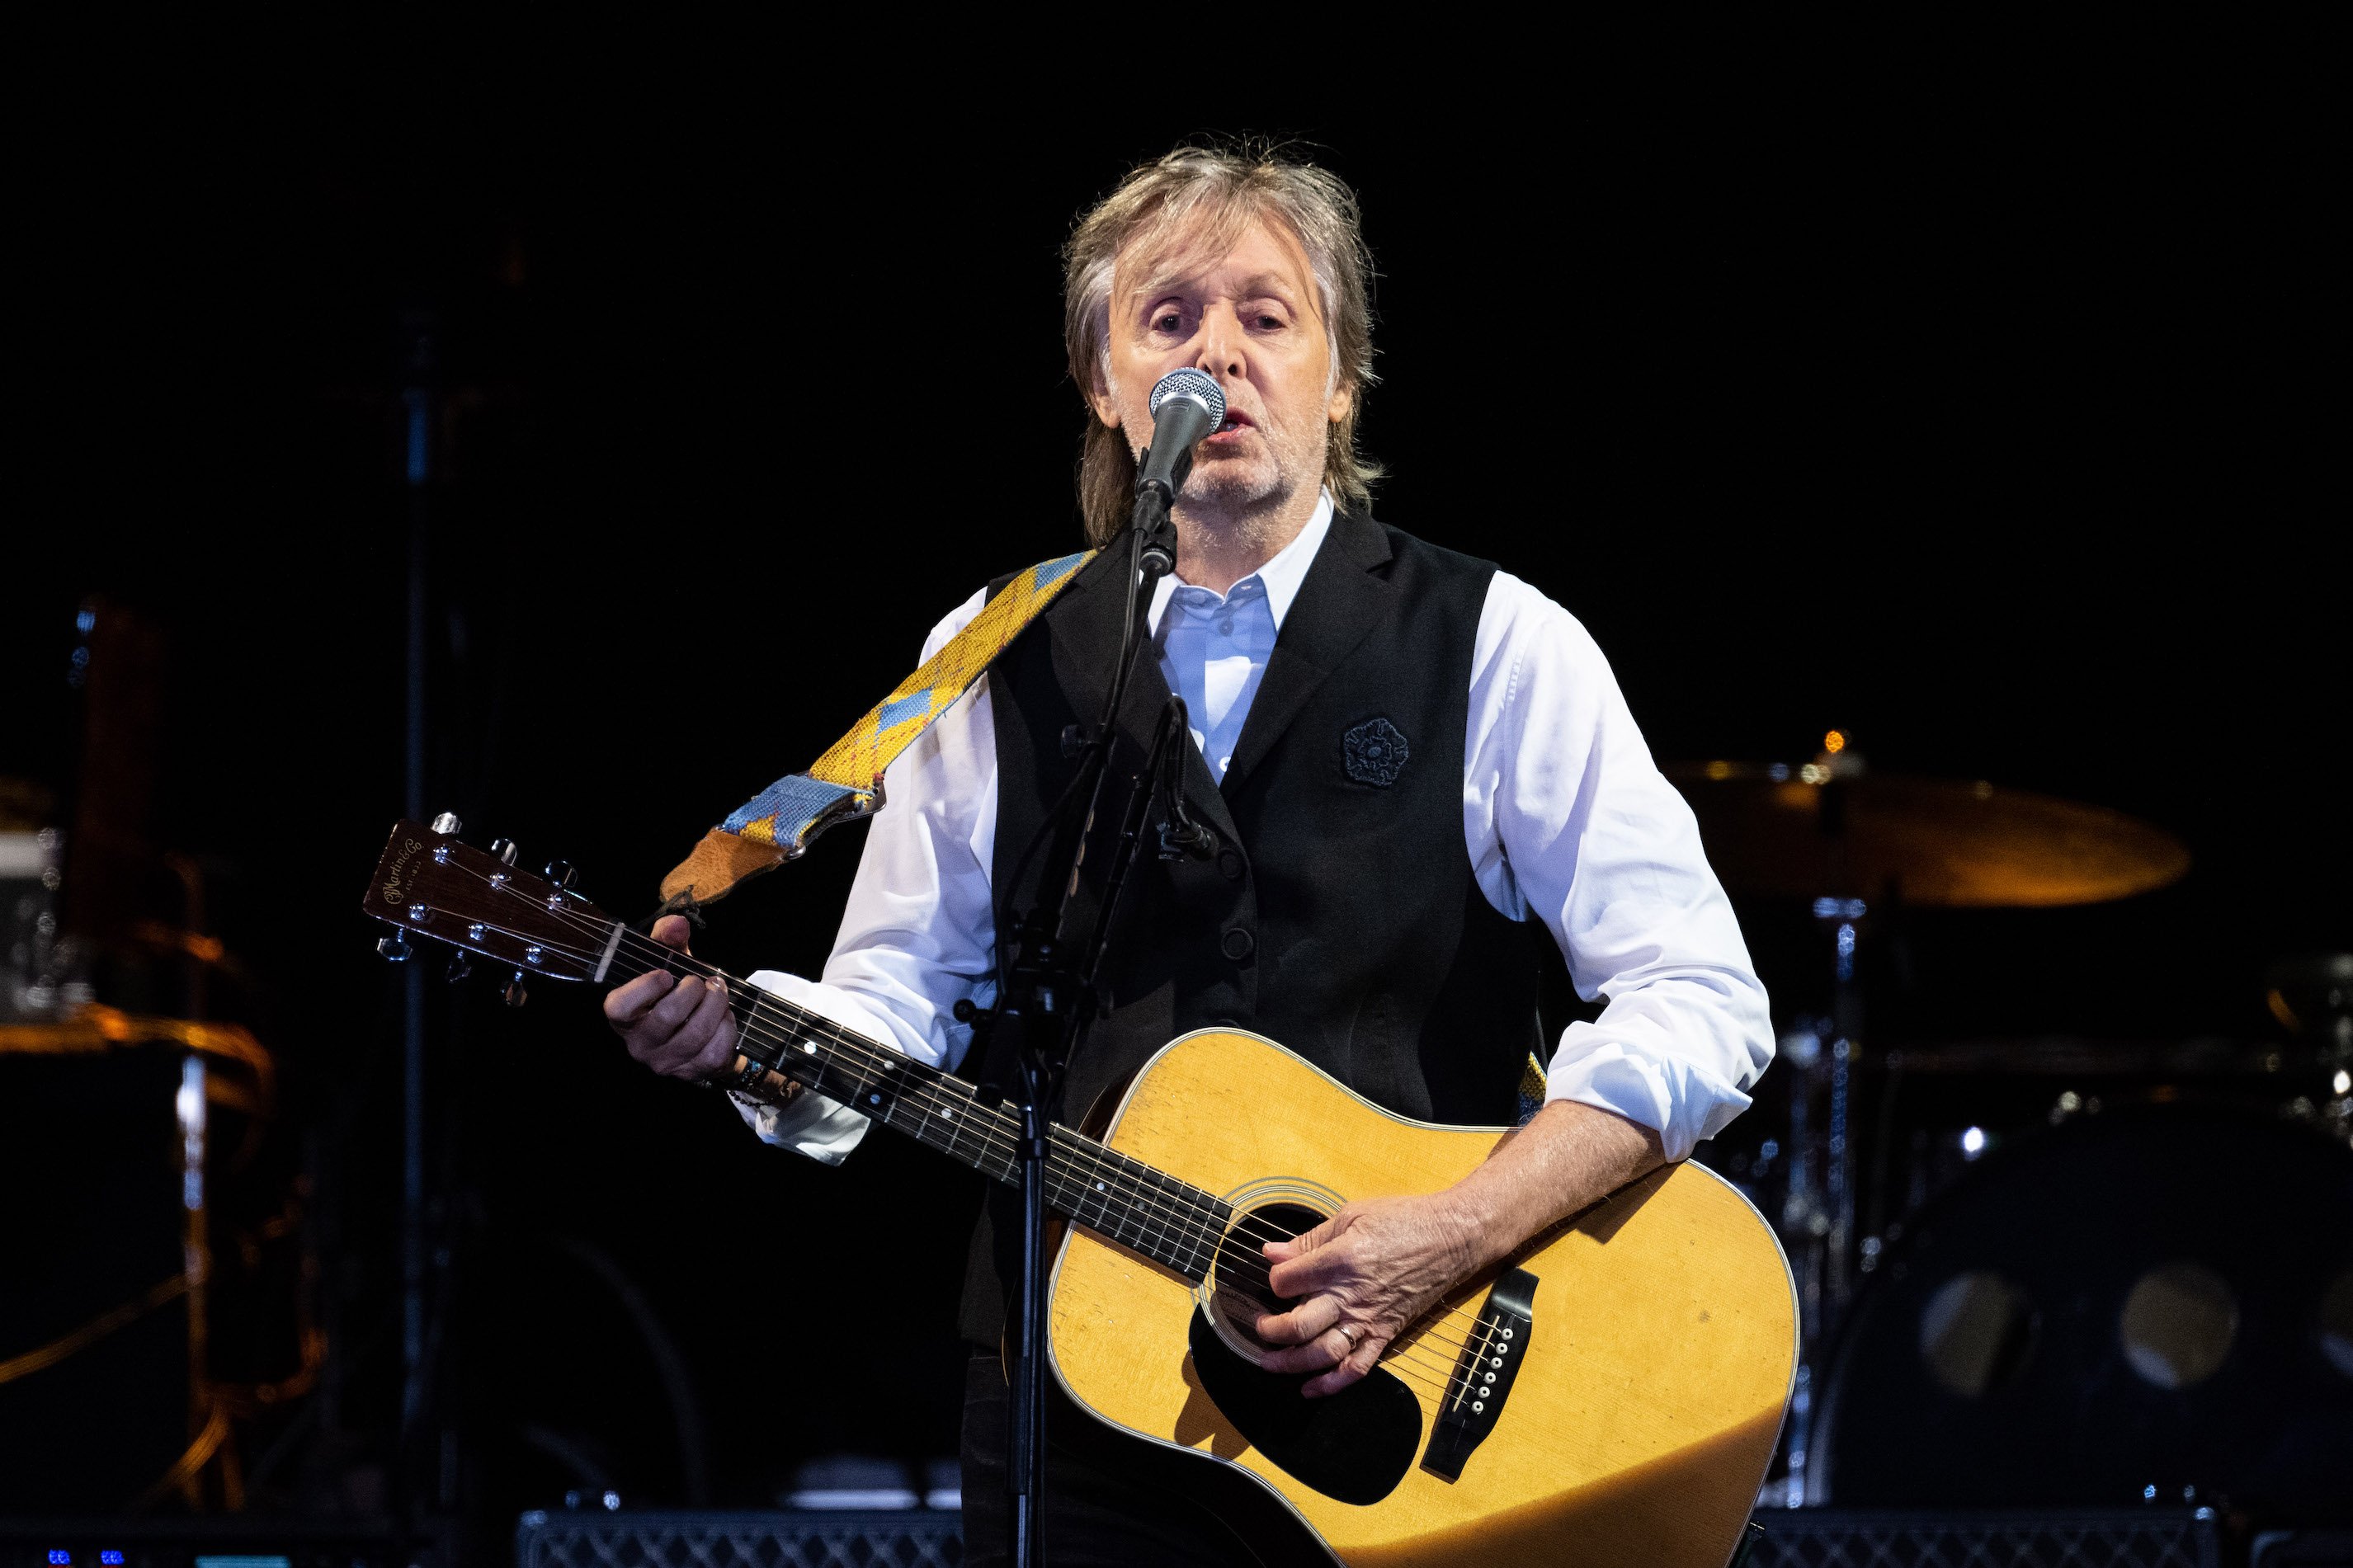 Paul McCartney performs on The Pyramid Stage during the Glastonbury Festival